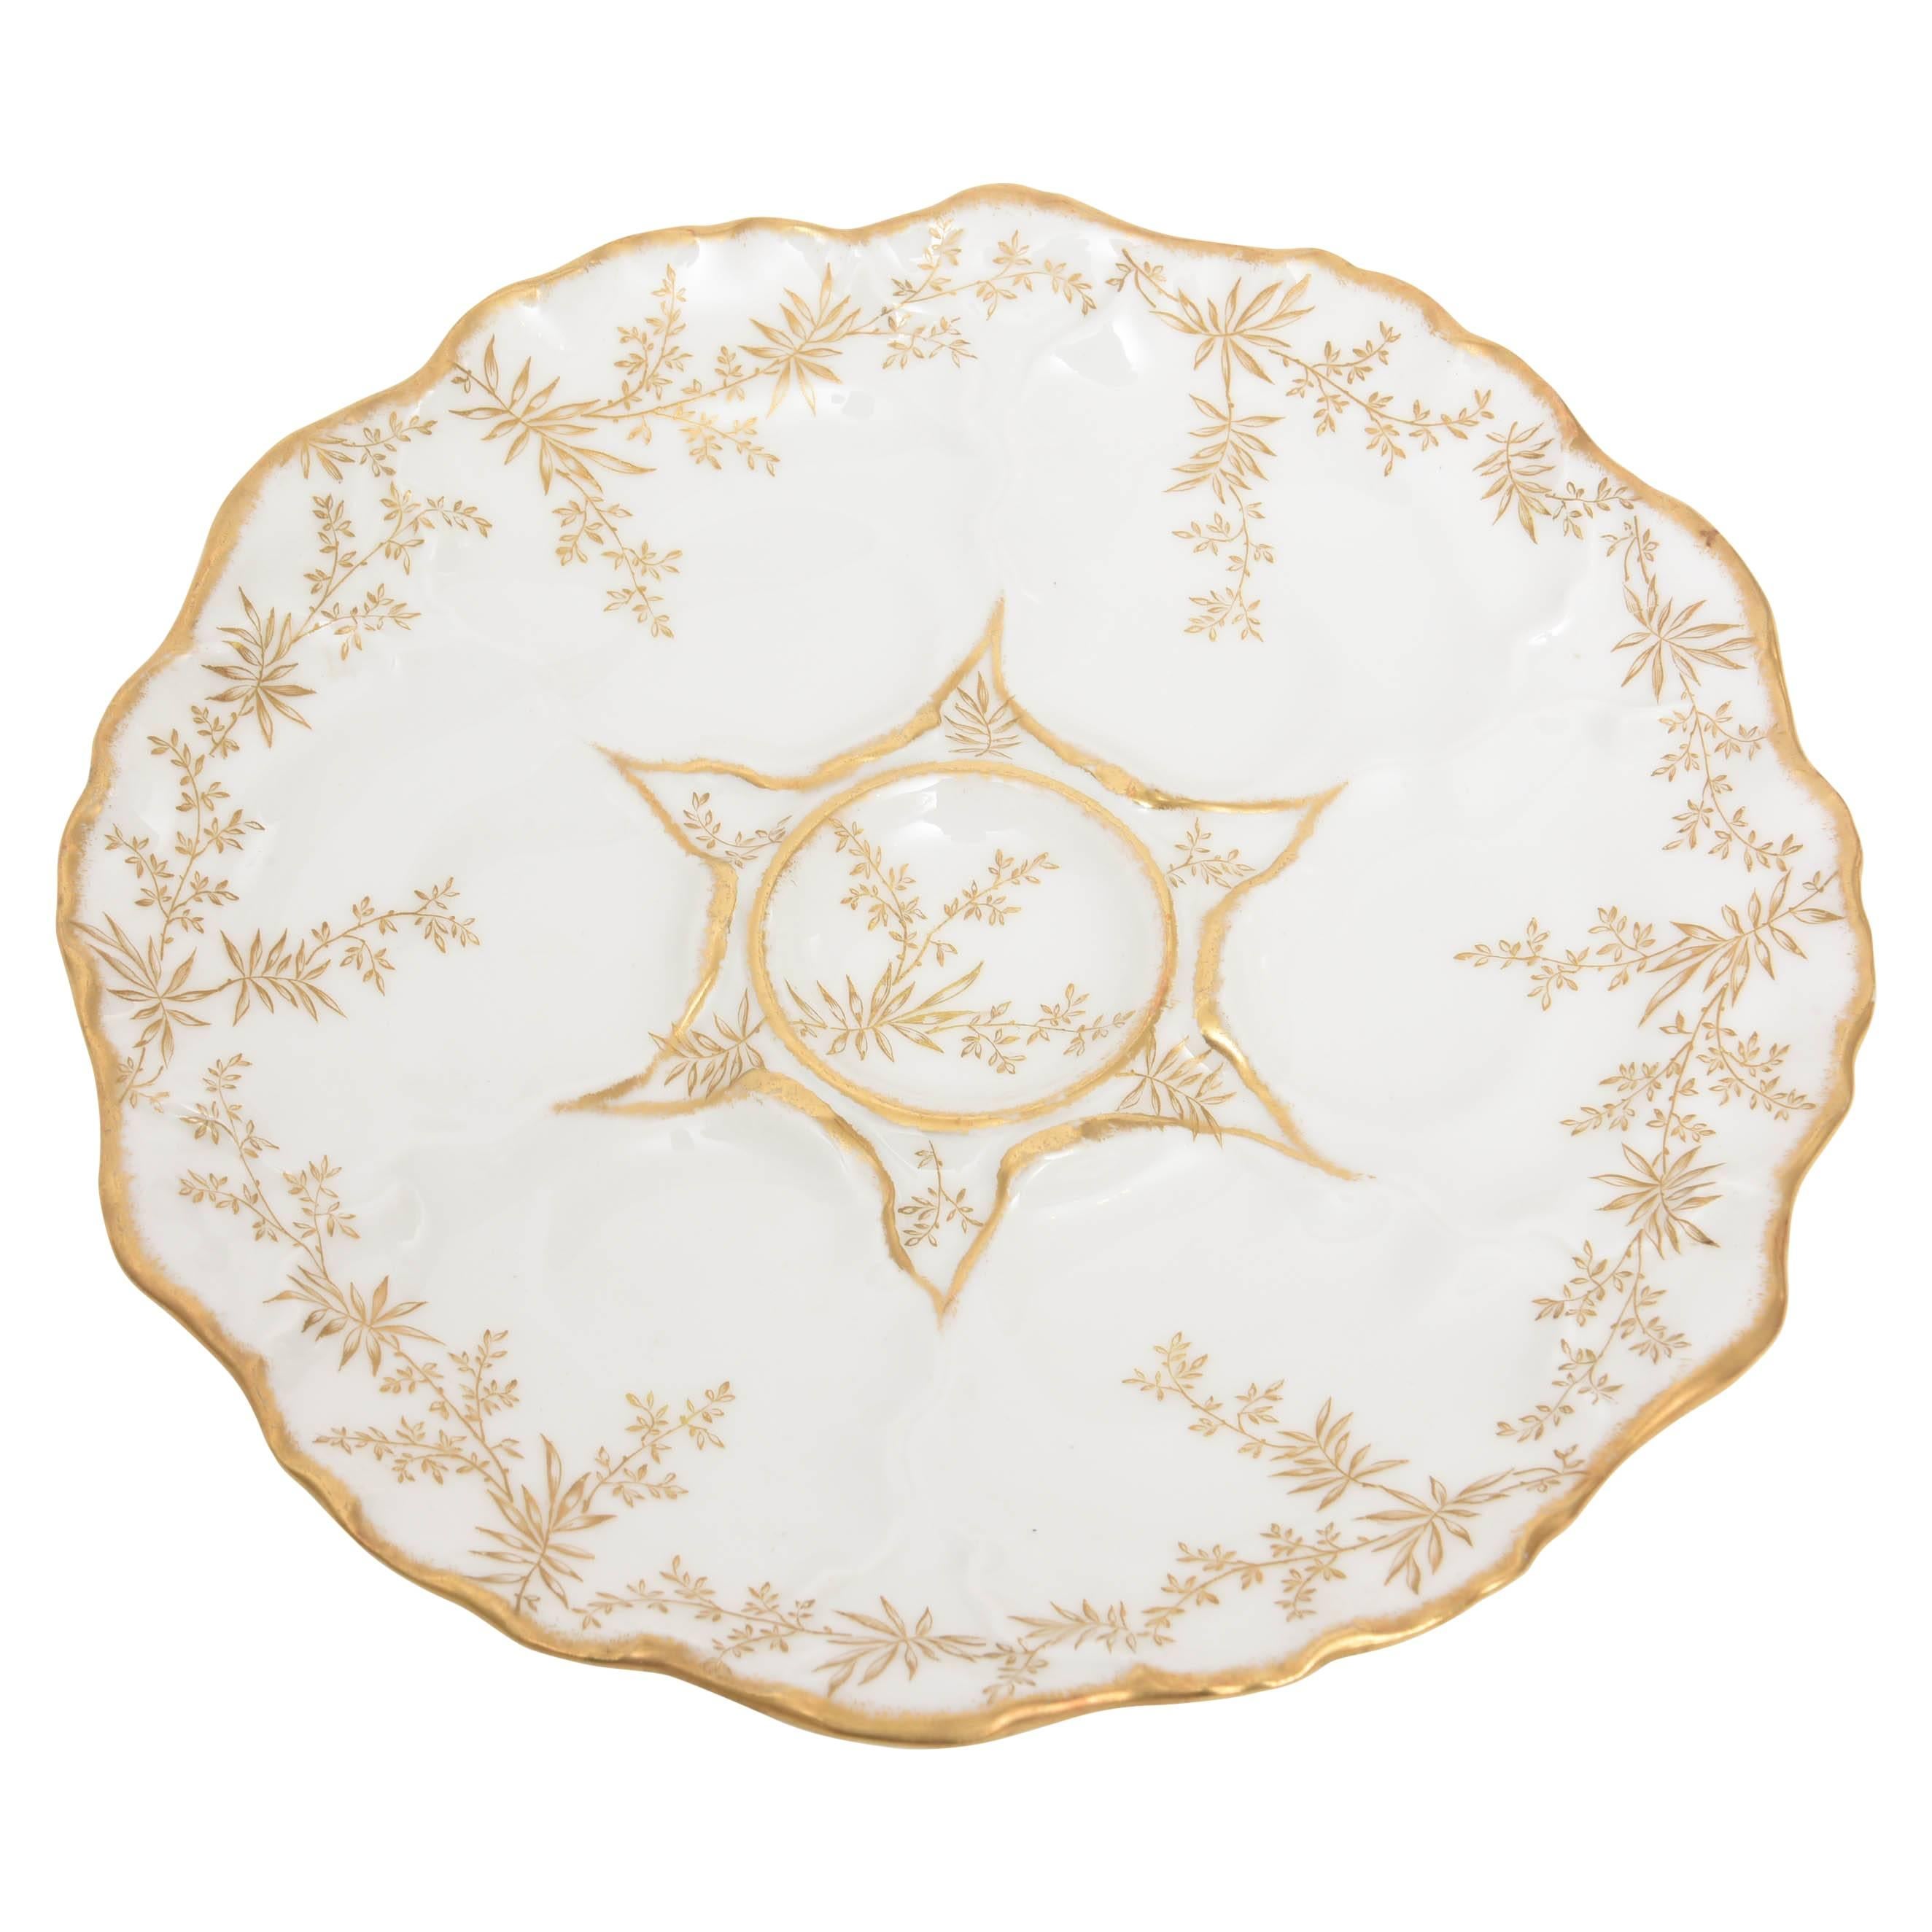 Oyster Plate by Limoges France, Scalloped Shape and Hand-Painted Gold